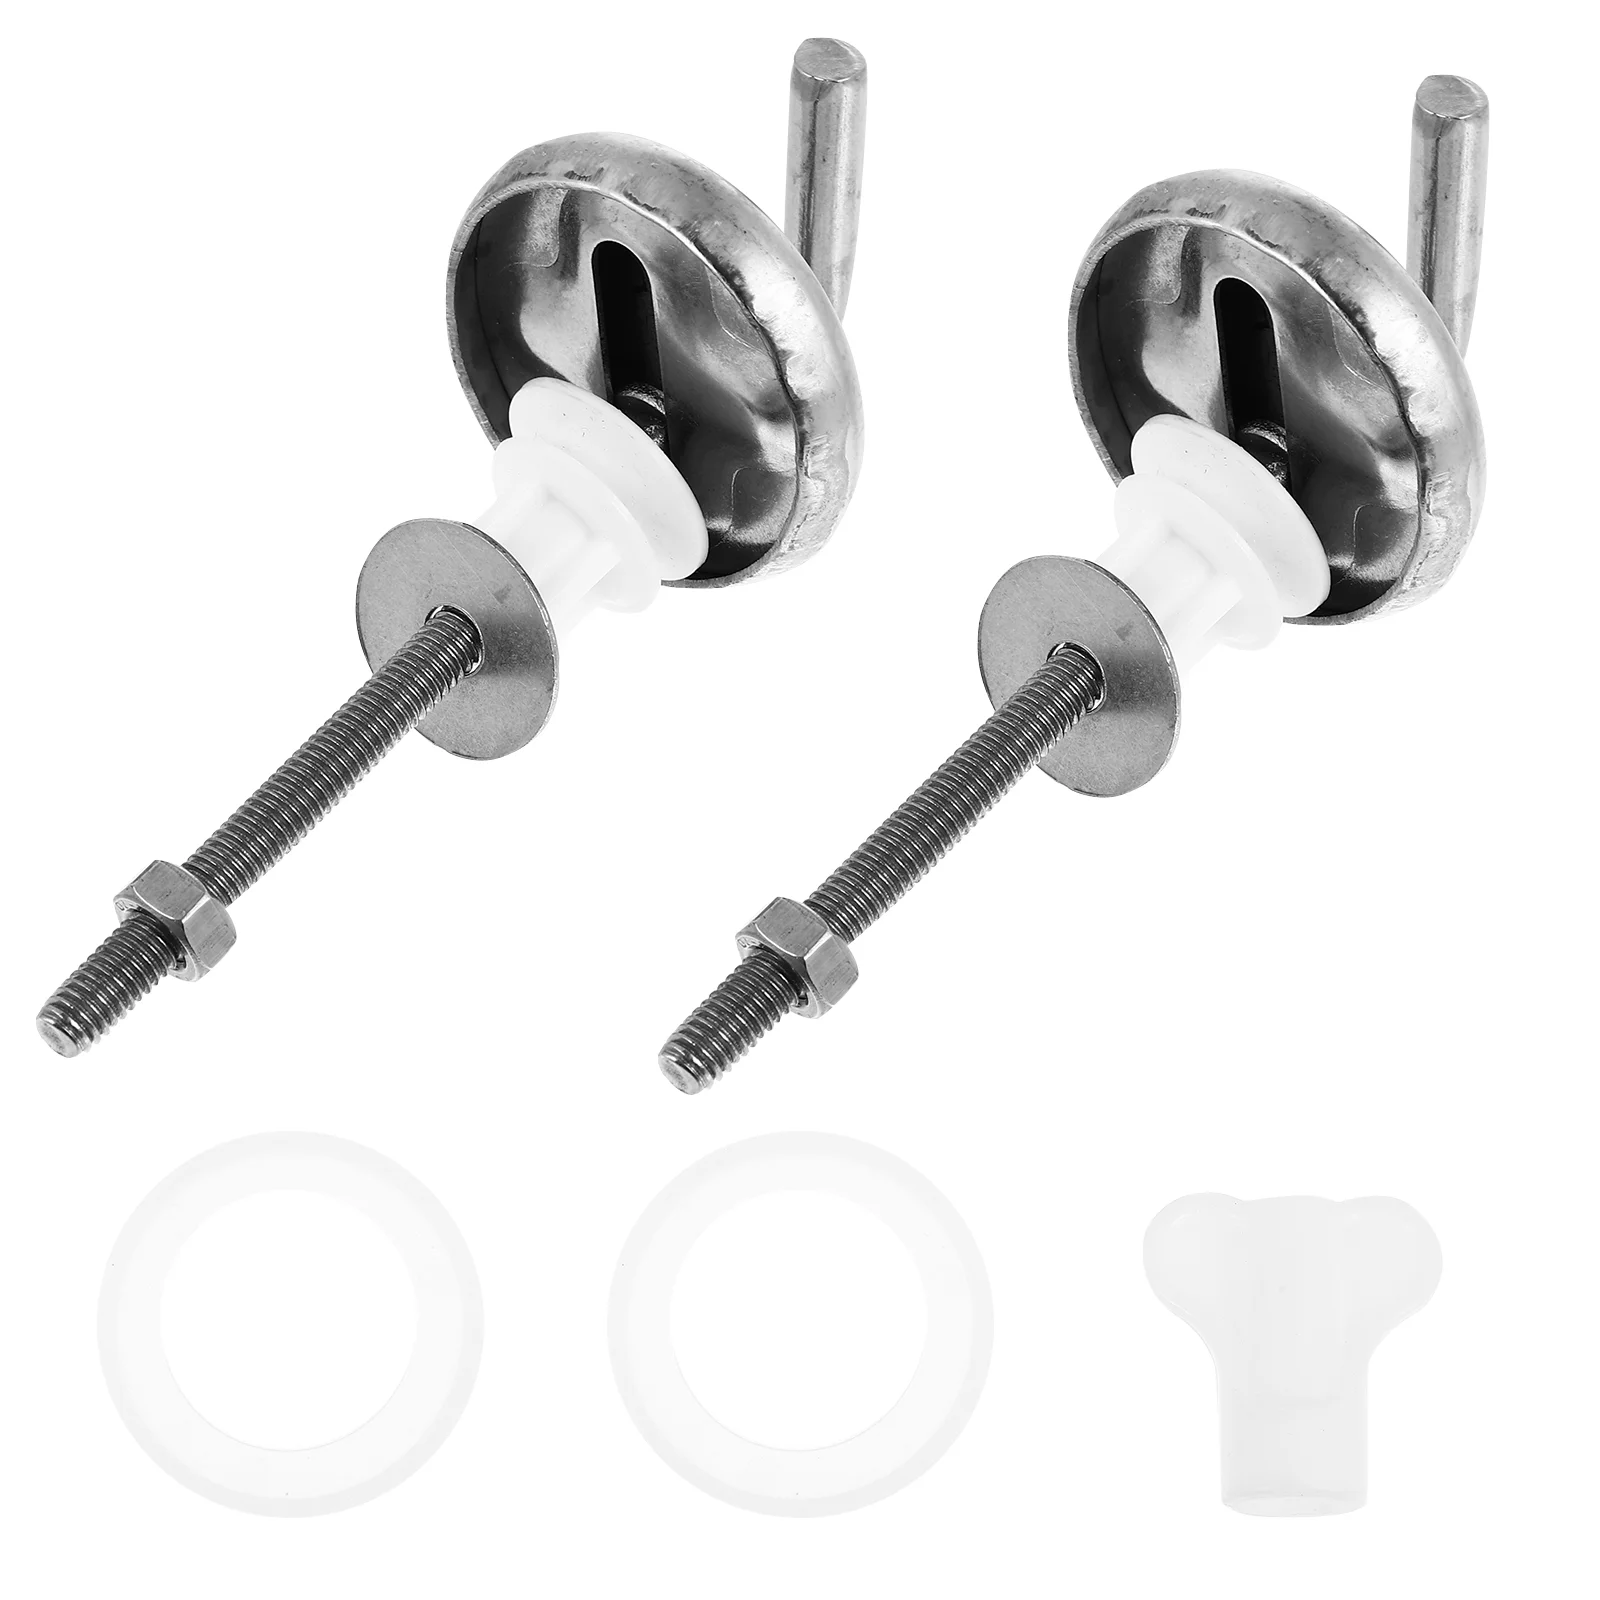 

Toilet Lid Hinge Home Seat Screws Fastener Replacement Cover Fixed Fixing Replacing Stainless Steel